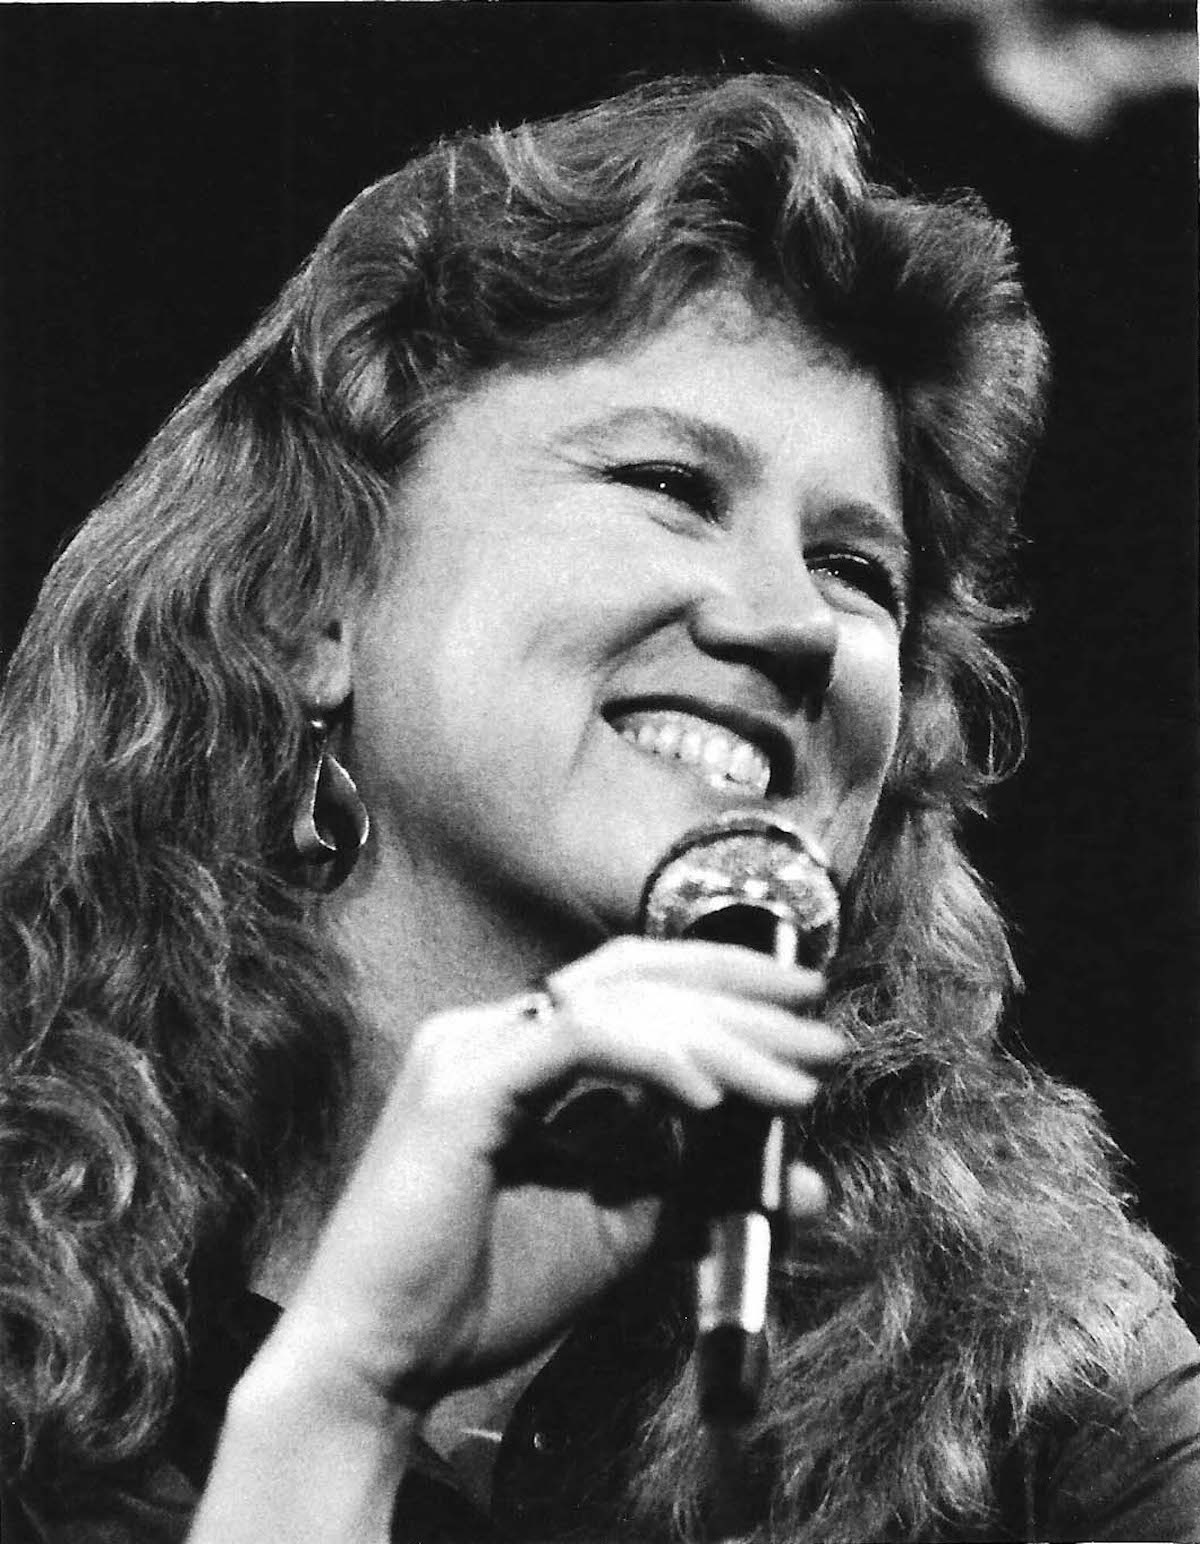 Holly performing at the Great American Music Hall for a Valentine’s Day concert, San Francisco, CA, 1984. Photo Credit: J.A. Rubino. Photo courtesy of Holly Near.